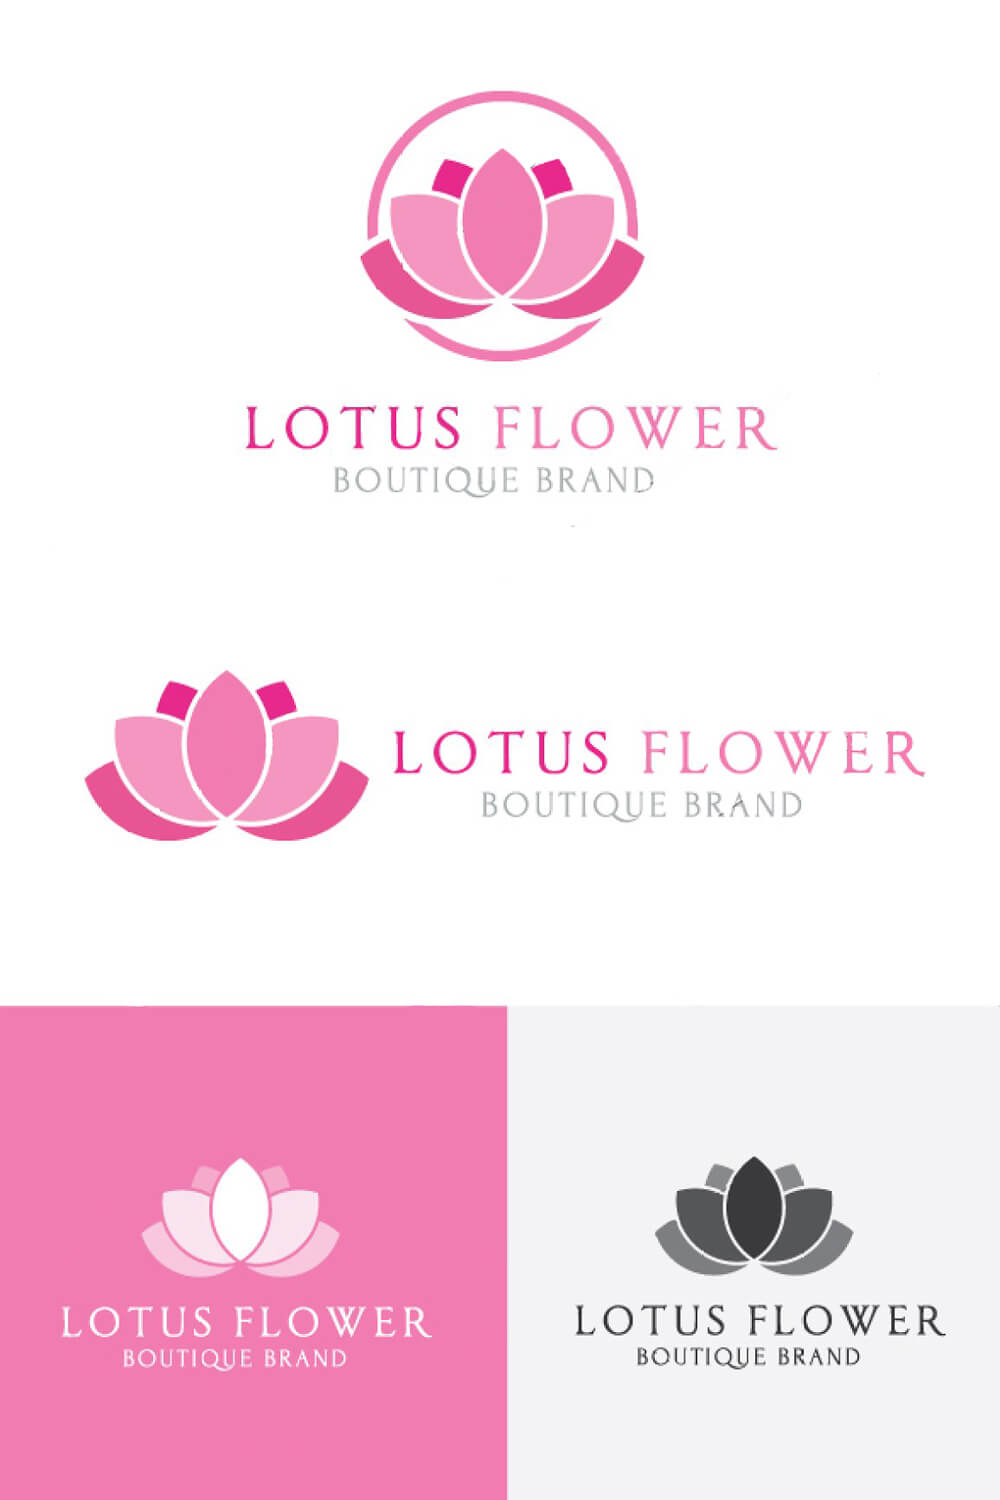 Four variants of the lotus flower logo in pink and gray on a white and pink background.